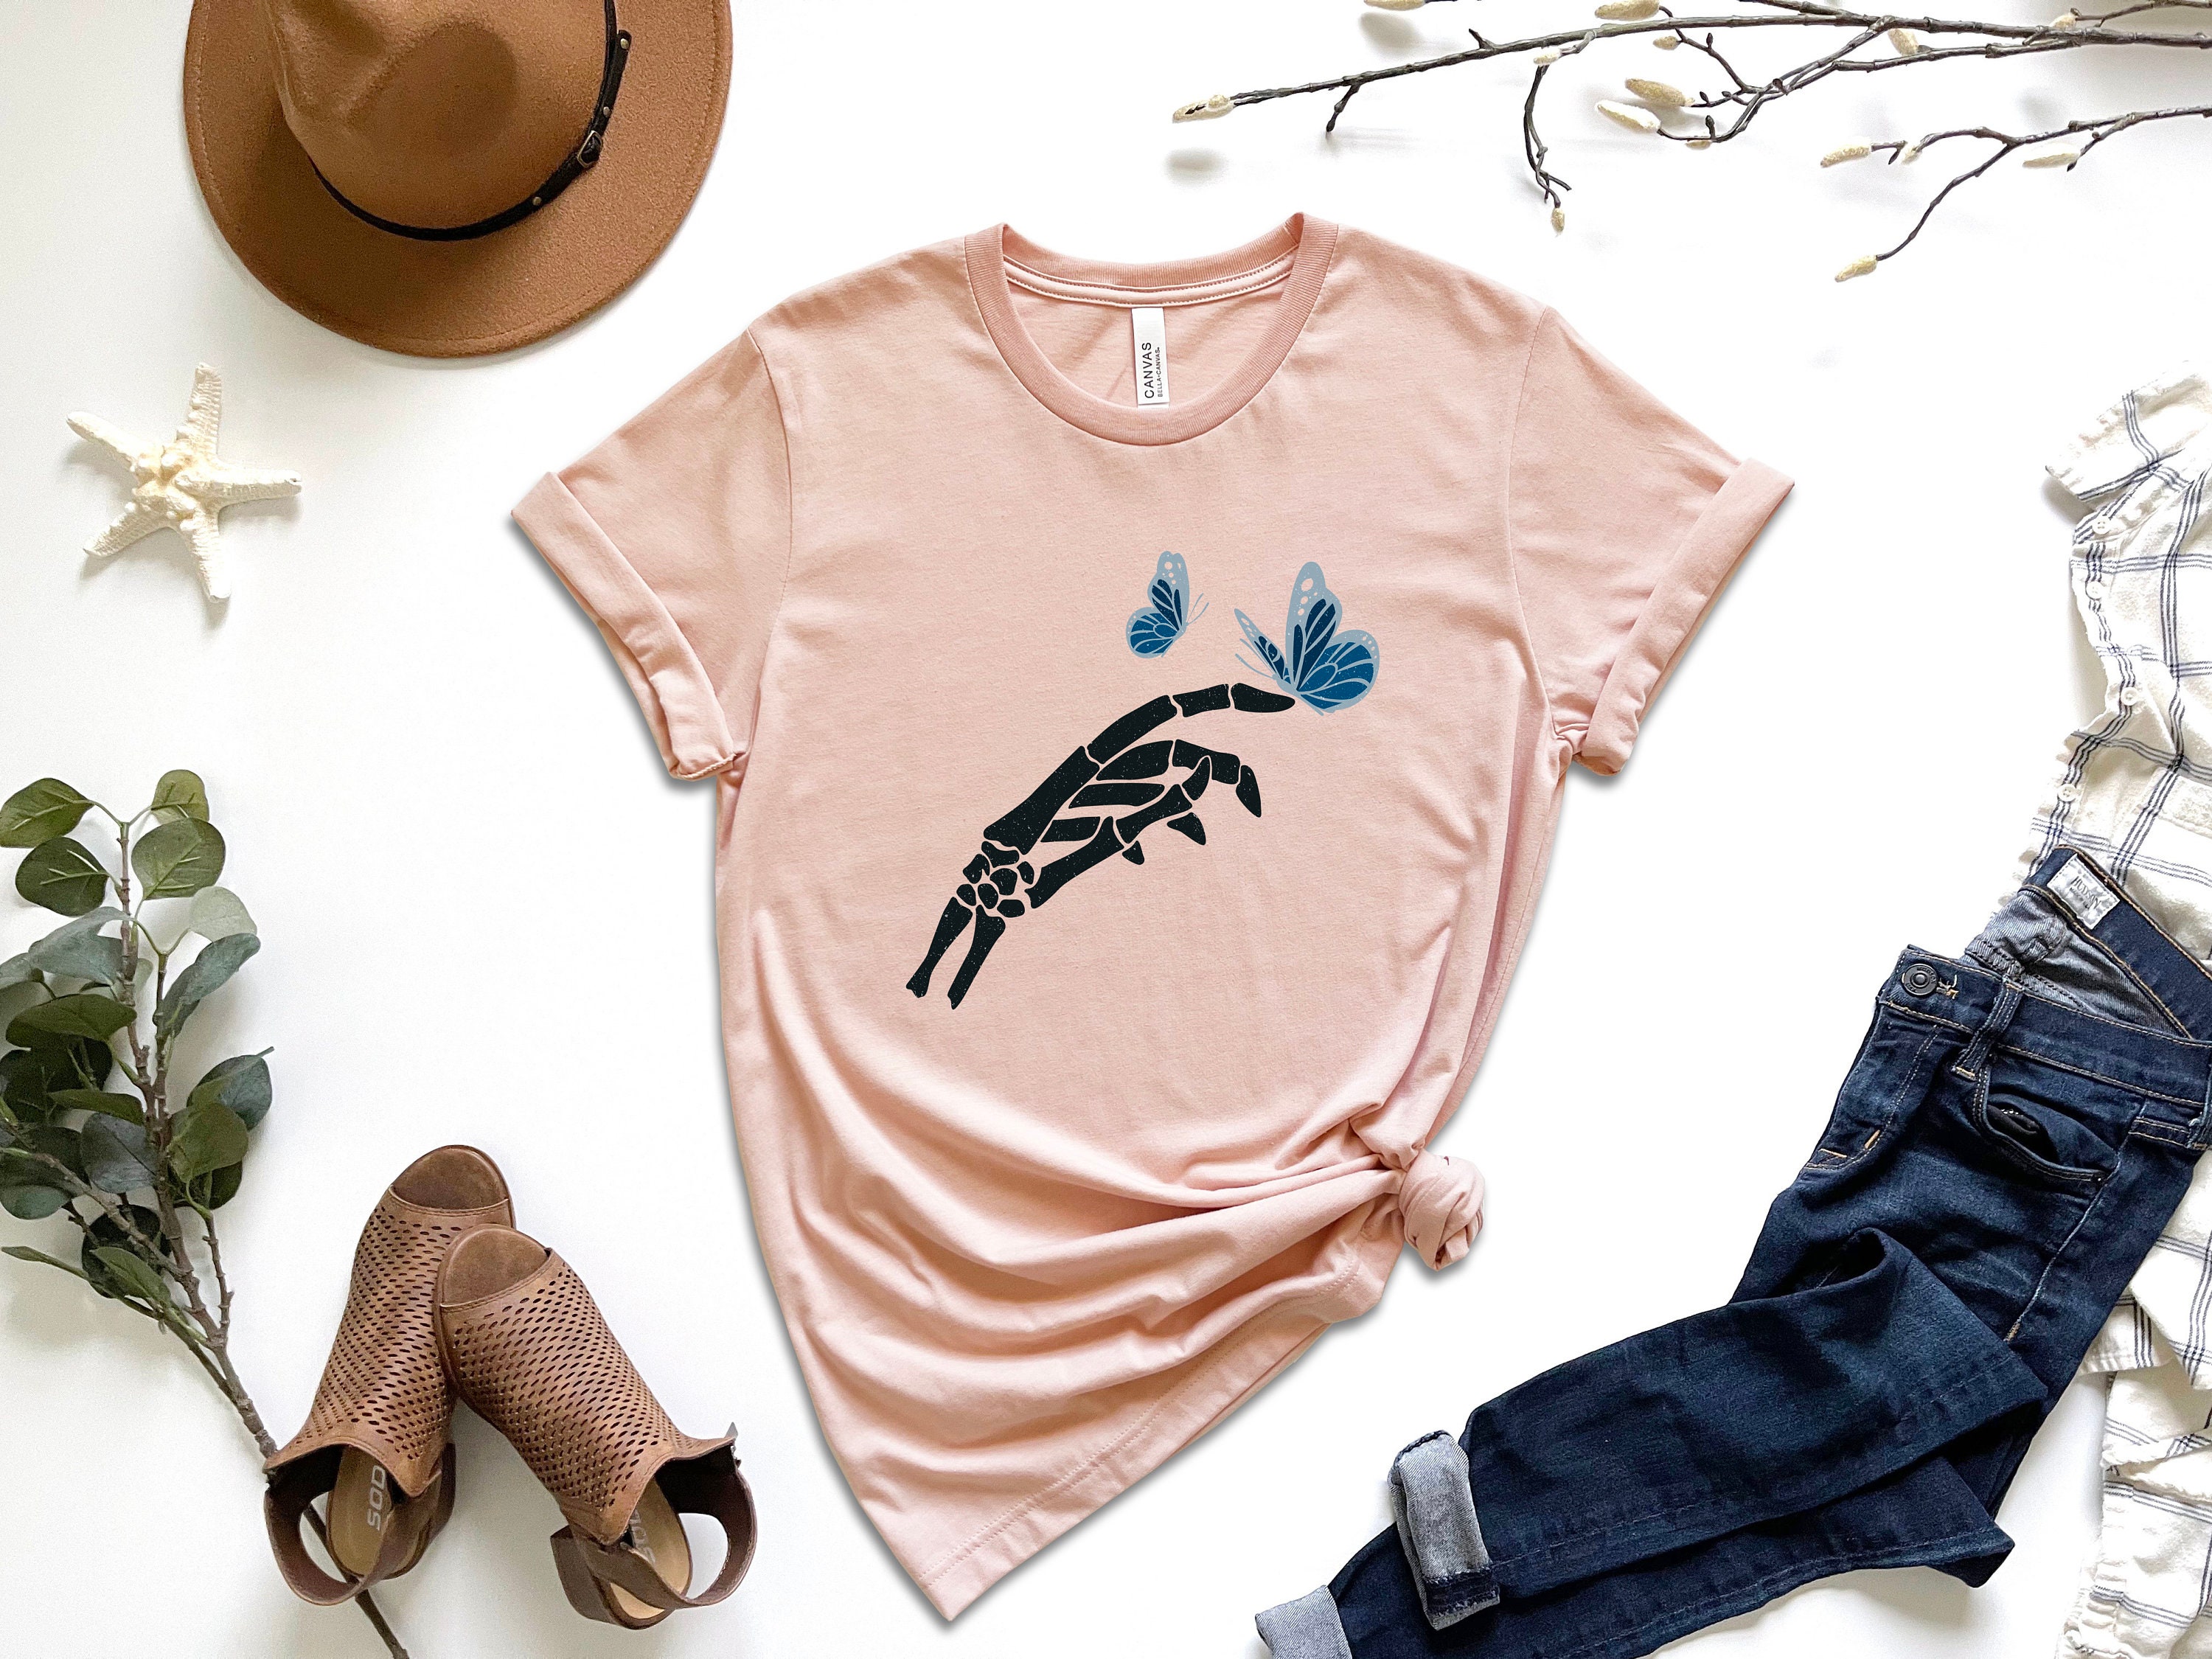 Discover Floral Butterfly Skeleton Hand T-shirt, Butterfly Shirt, Skeleton Shirt, Skeleton Hand Tee, Floral Shirt, Trendy Shirt, Ladies Funny Shirt